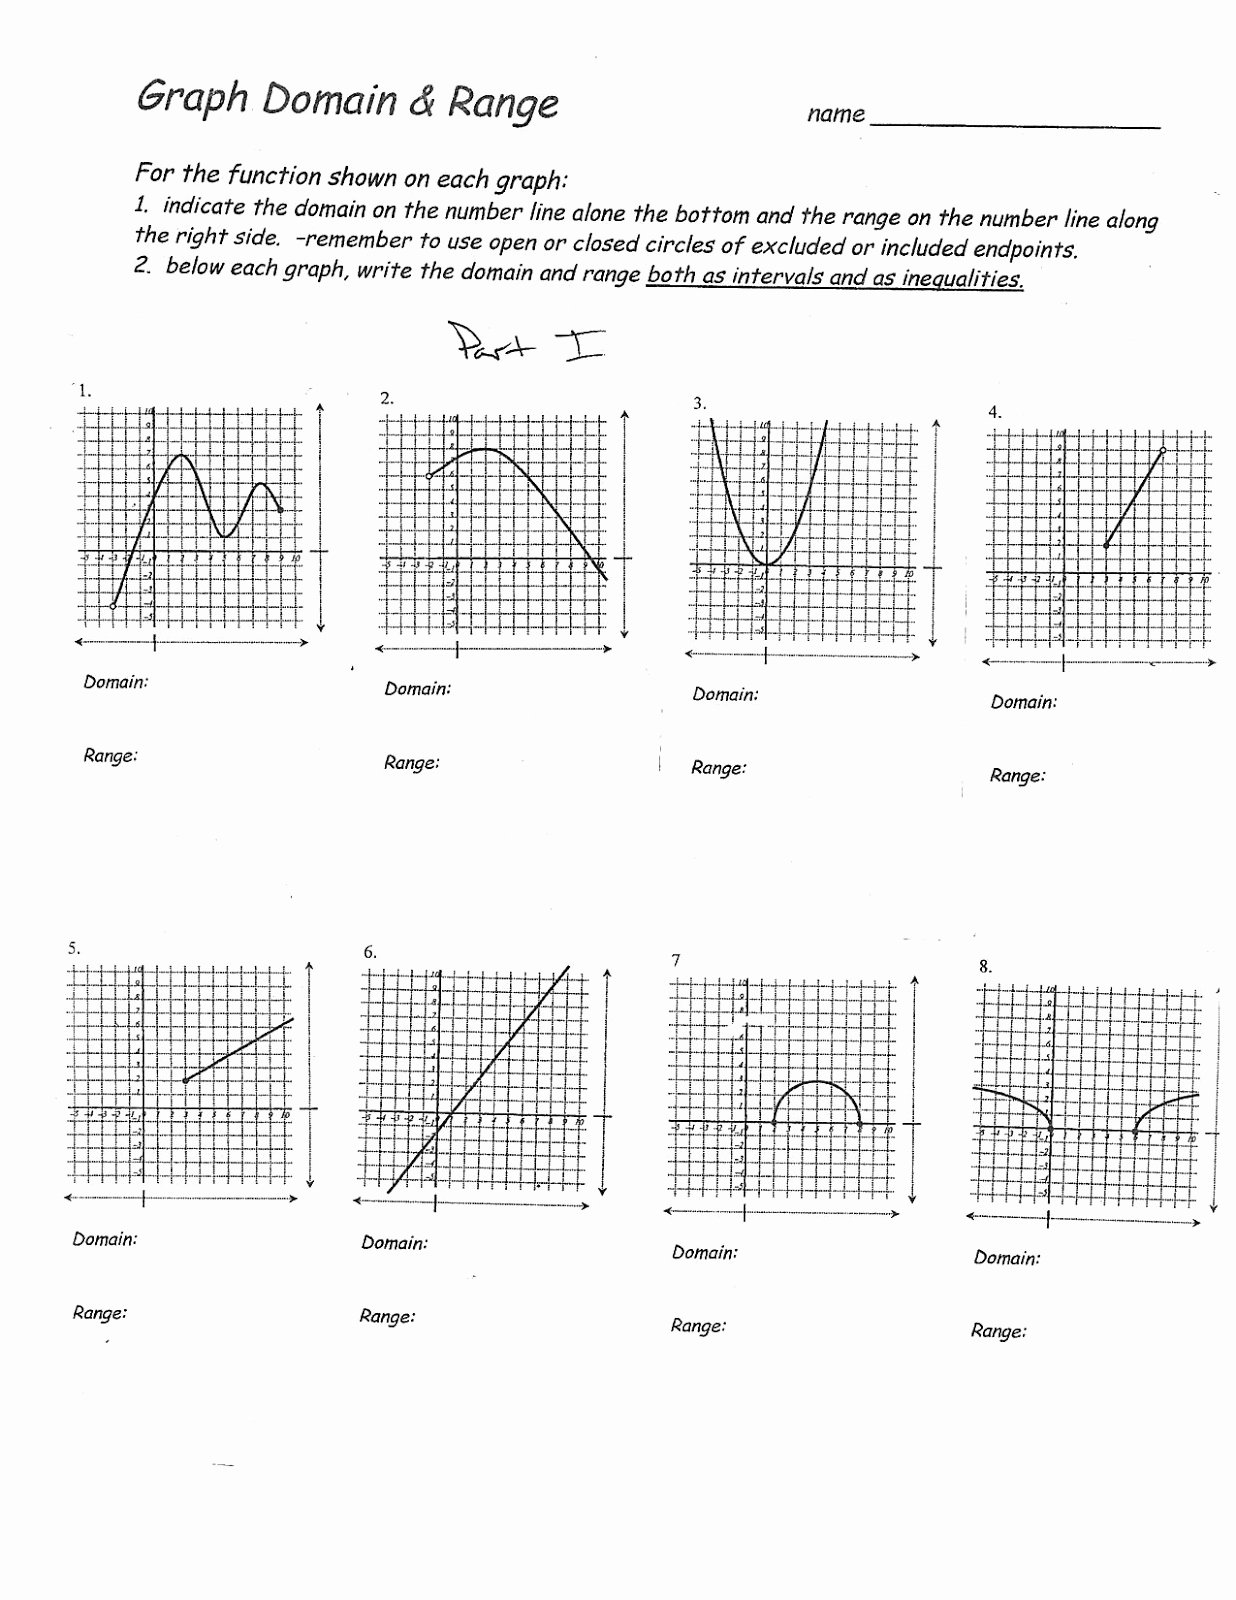 Domain and Range Of Graphs Worksheet Answers Inspirational Mr Suominen S Math Homepage College Mathematics 11 29 12